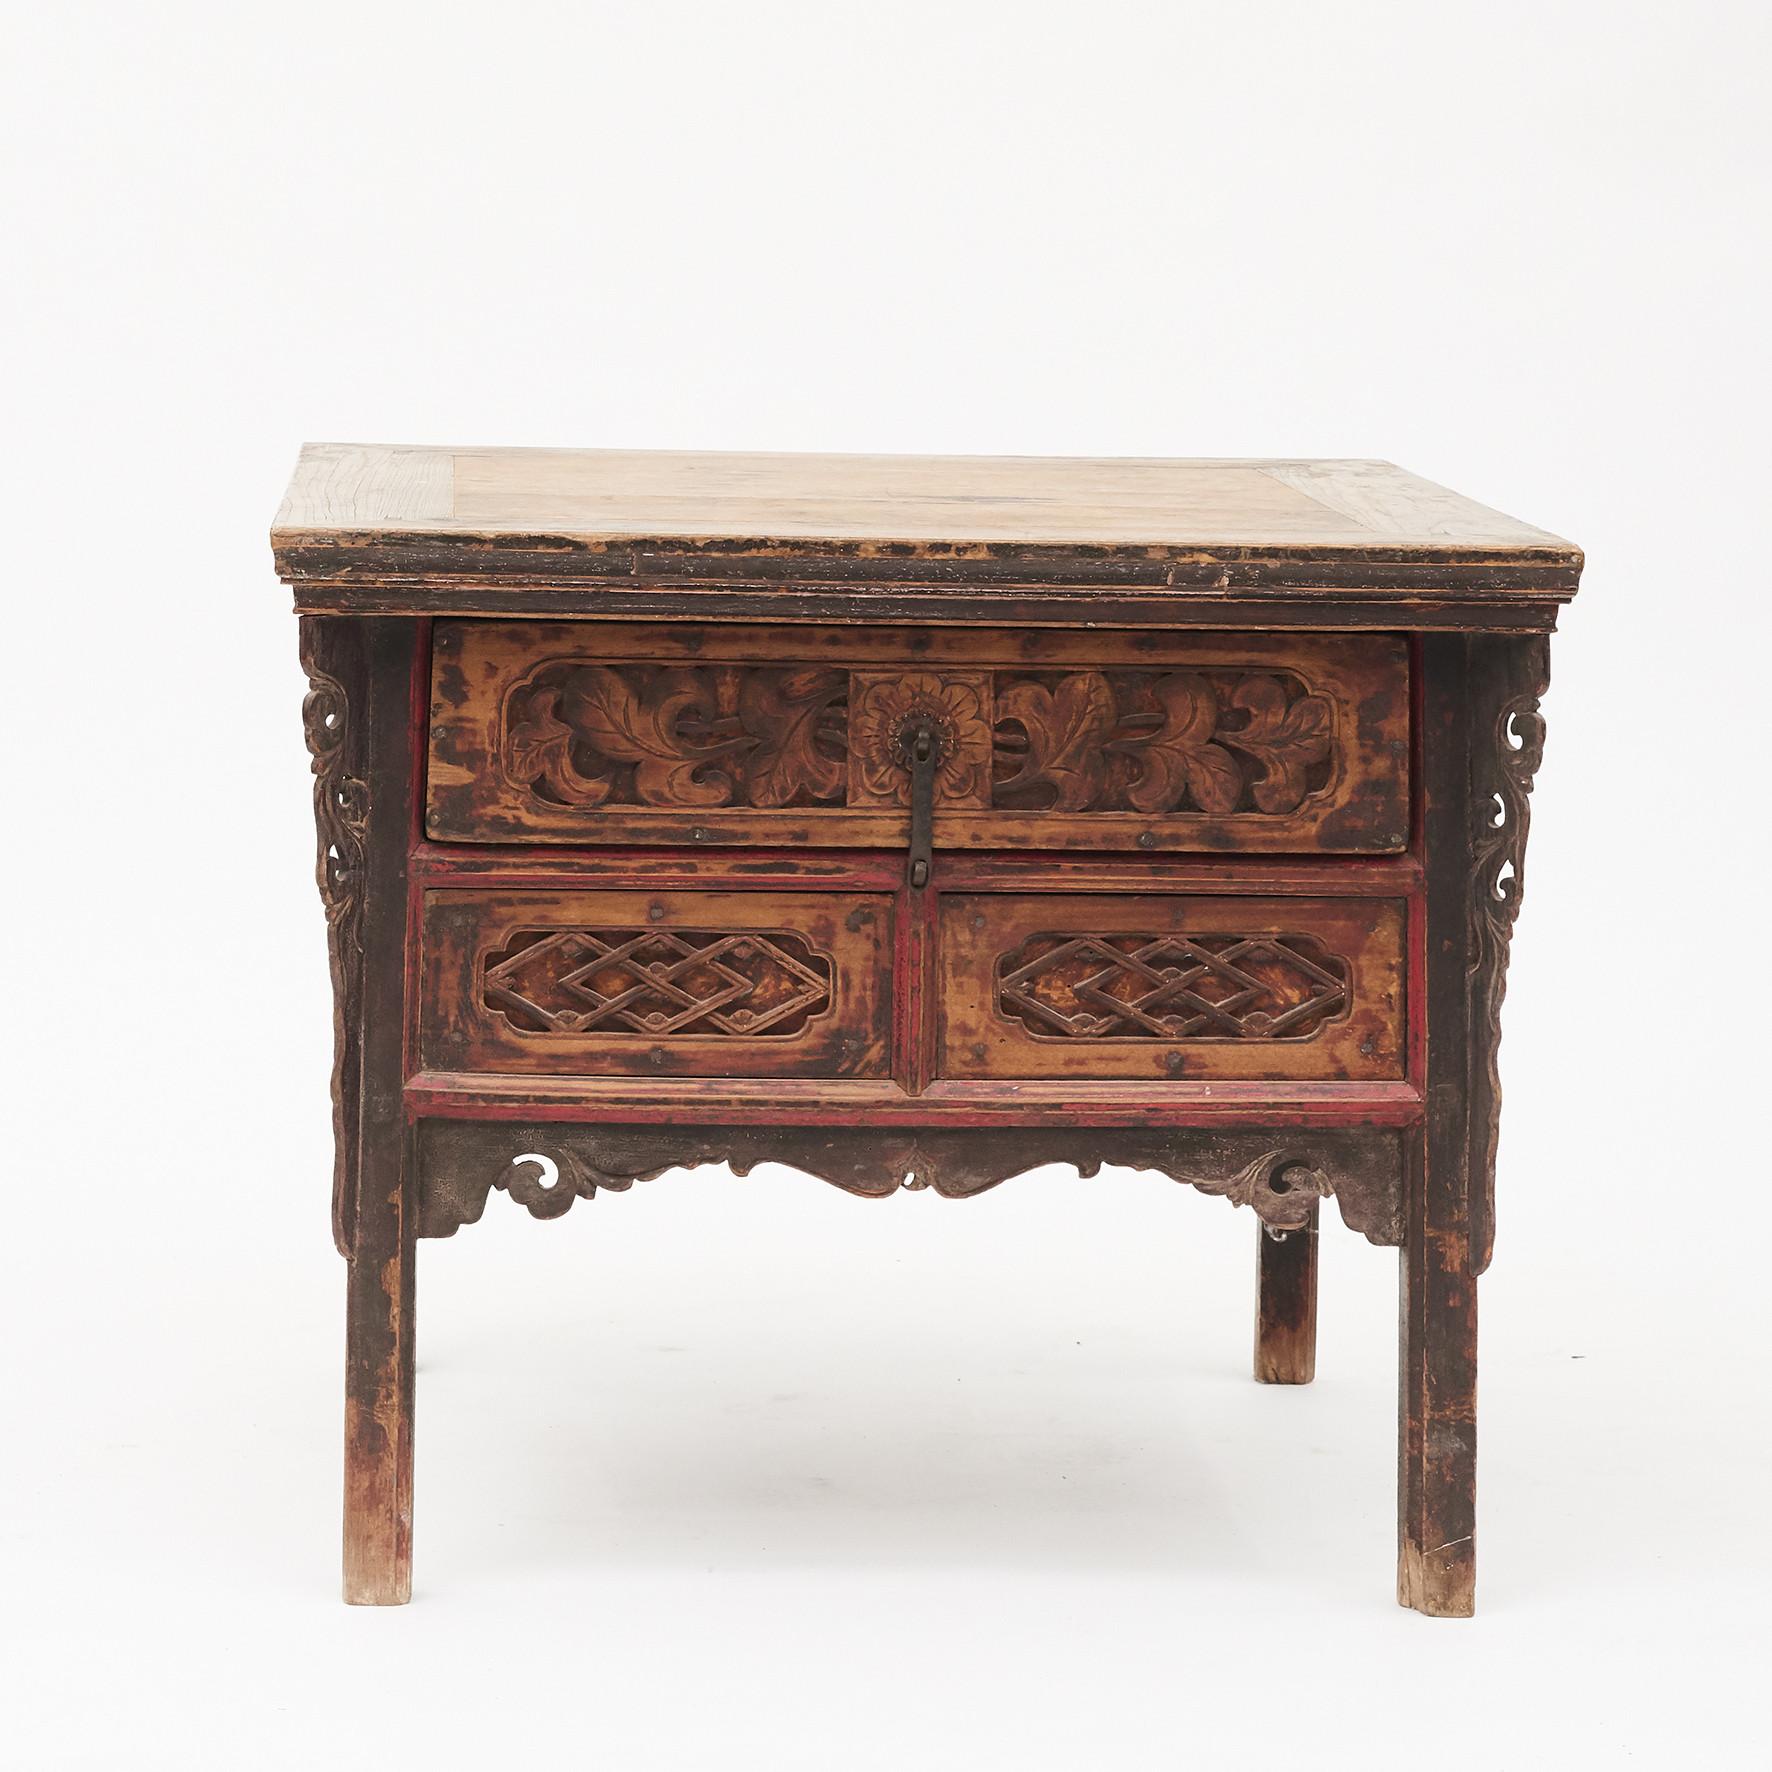 16th-17th century center table from 'Shanxi Province, China with 1 drawer.
Made of pine and with original polychrome lacquer.

Original condition. Rare piece of furniture.